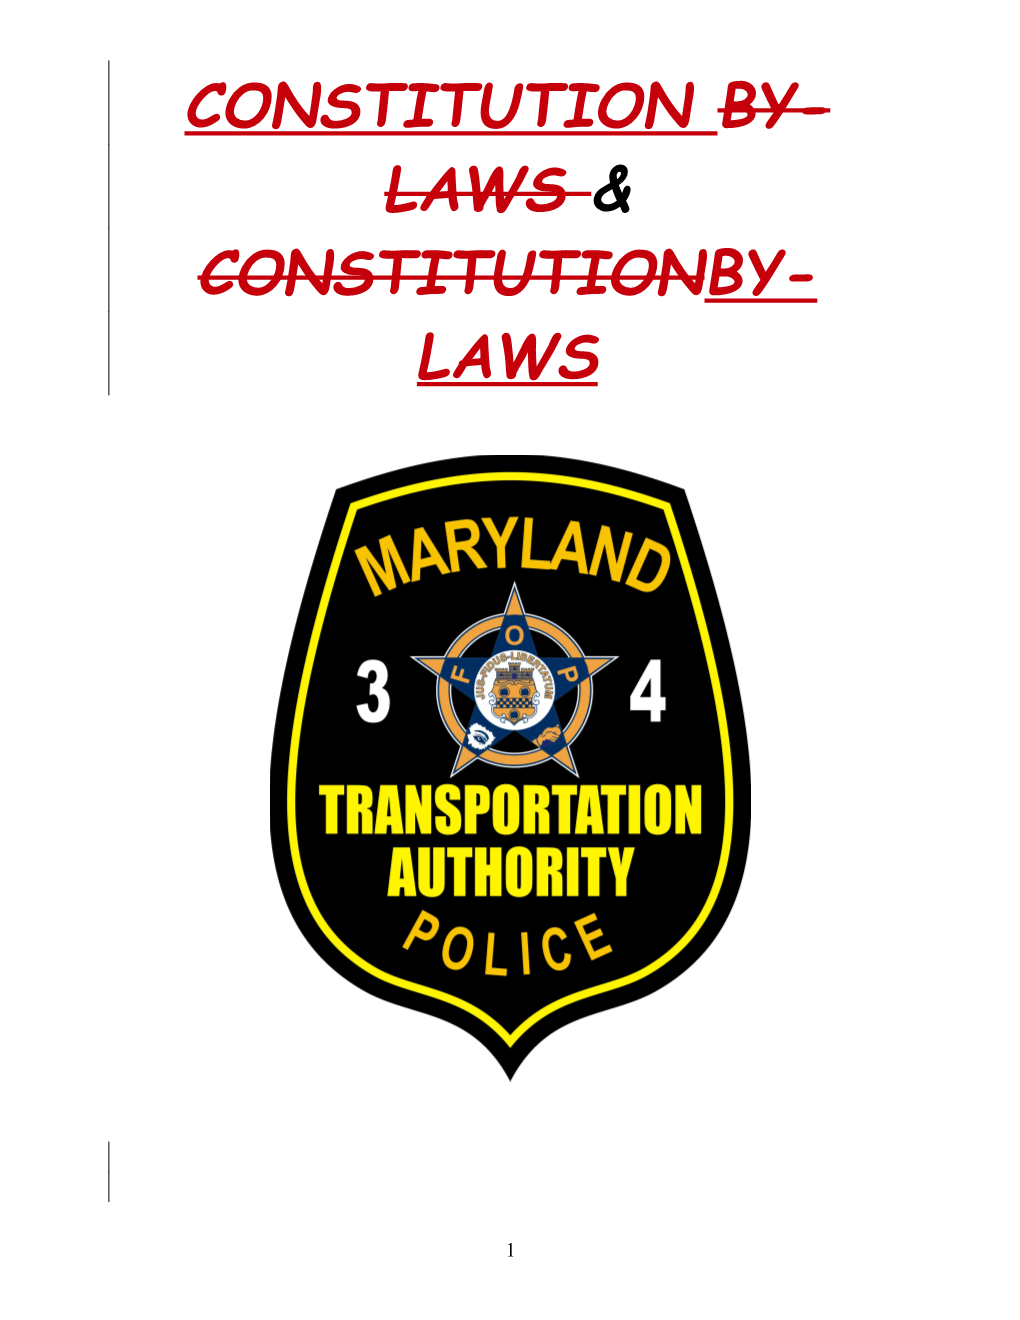 Fop By-Laws & Constitution